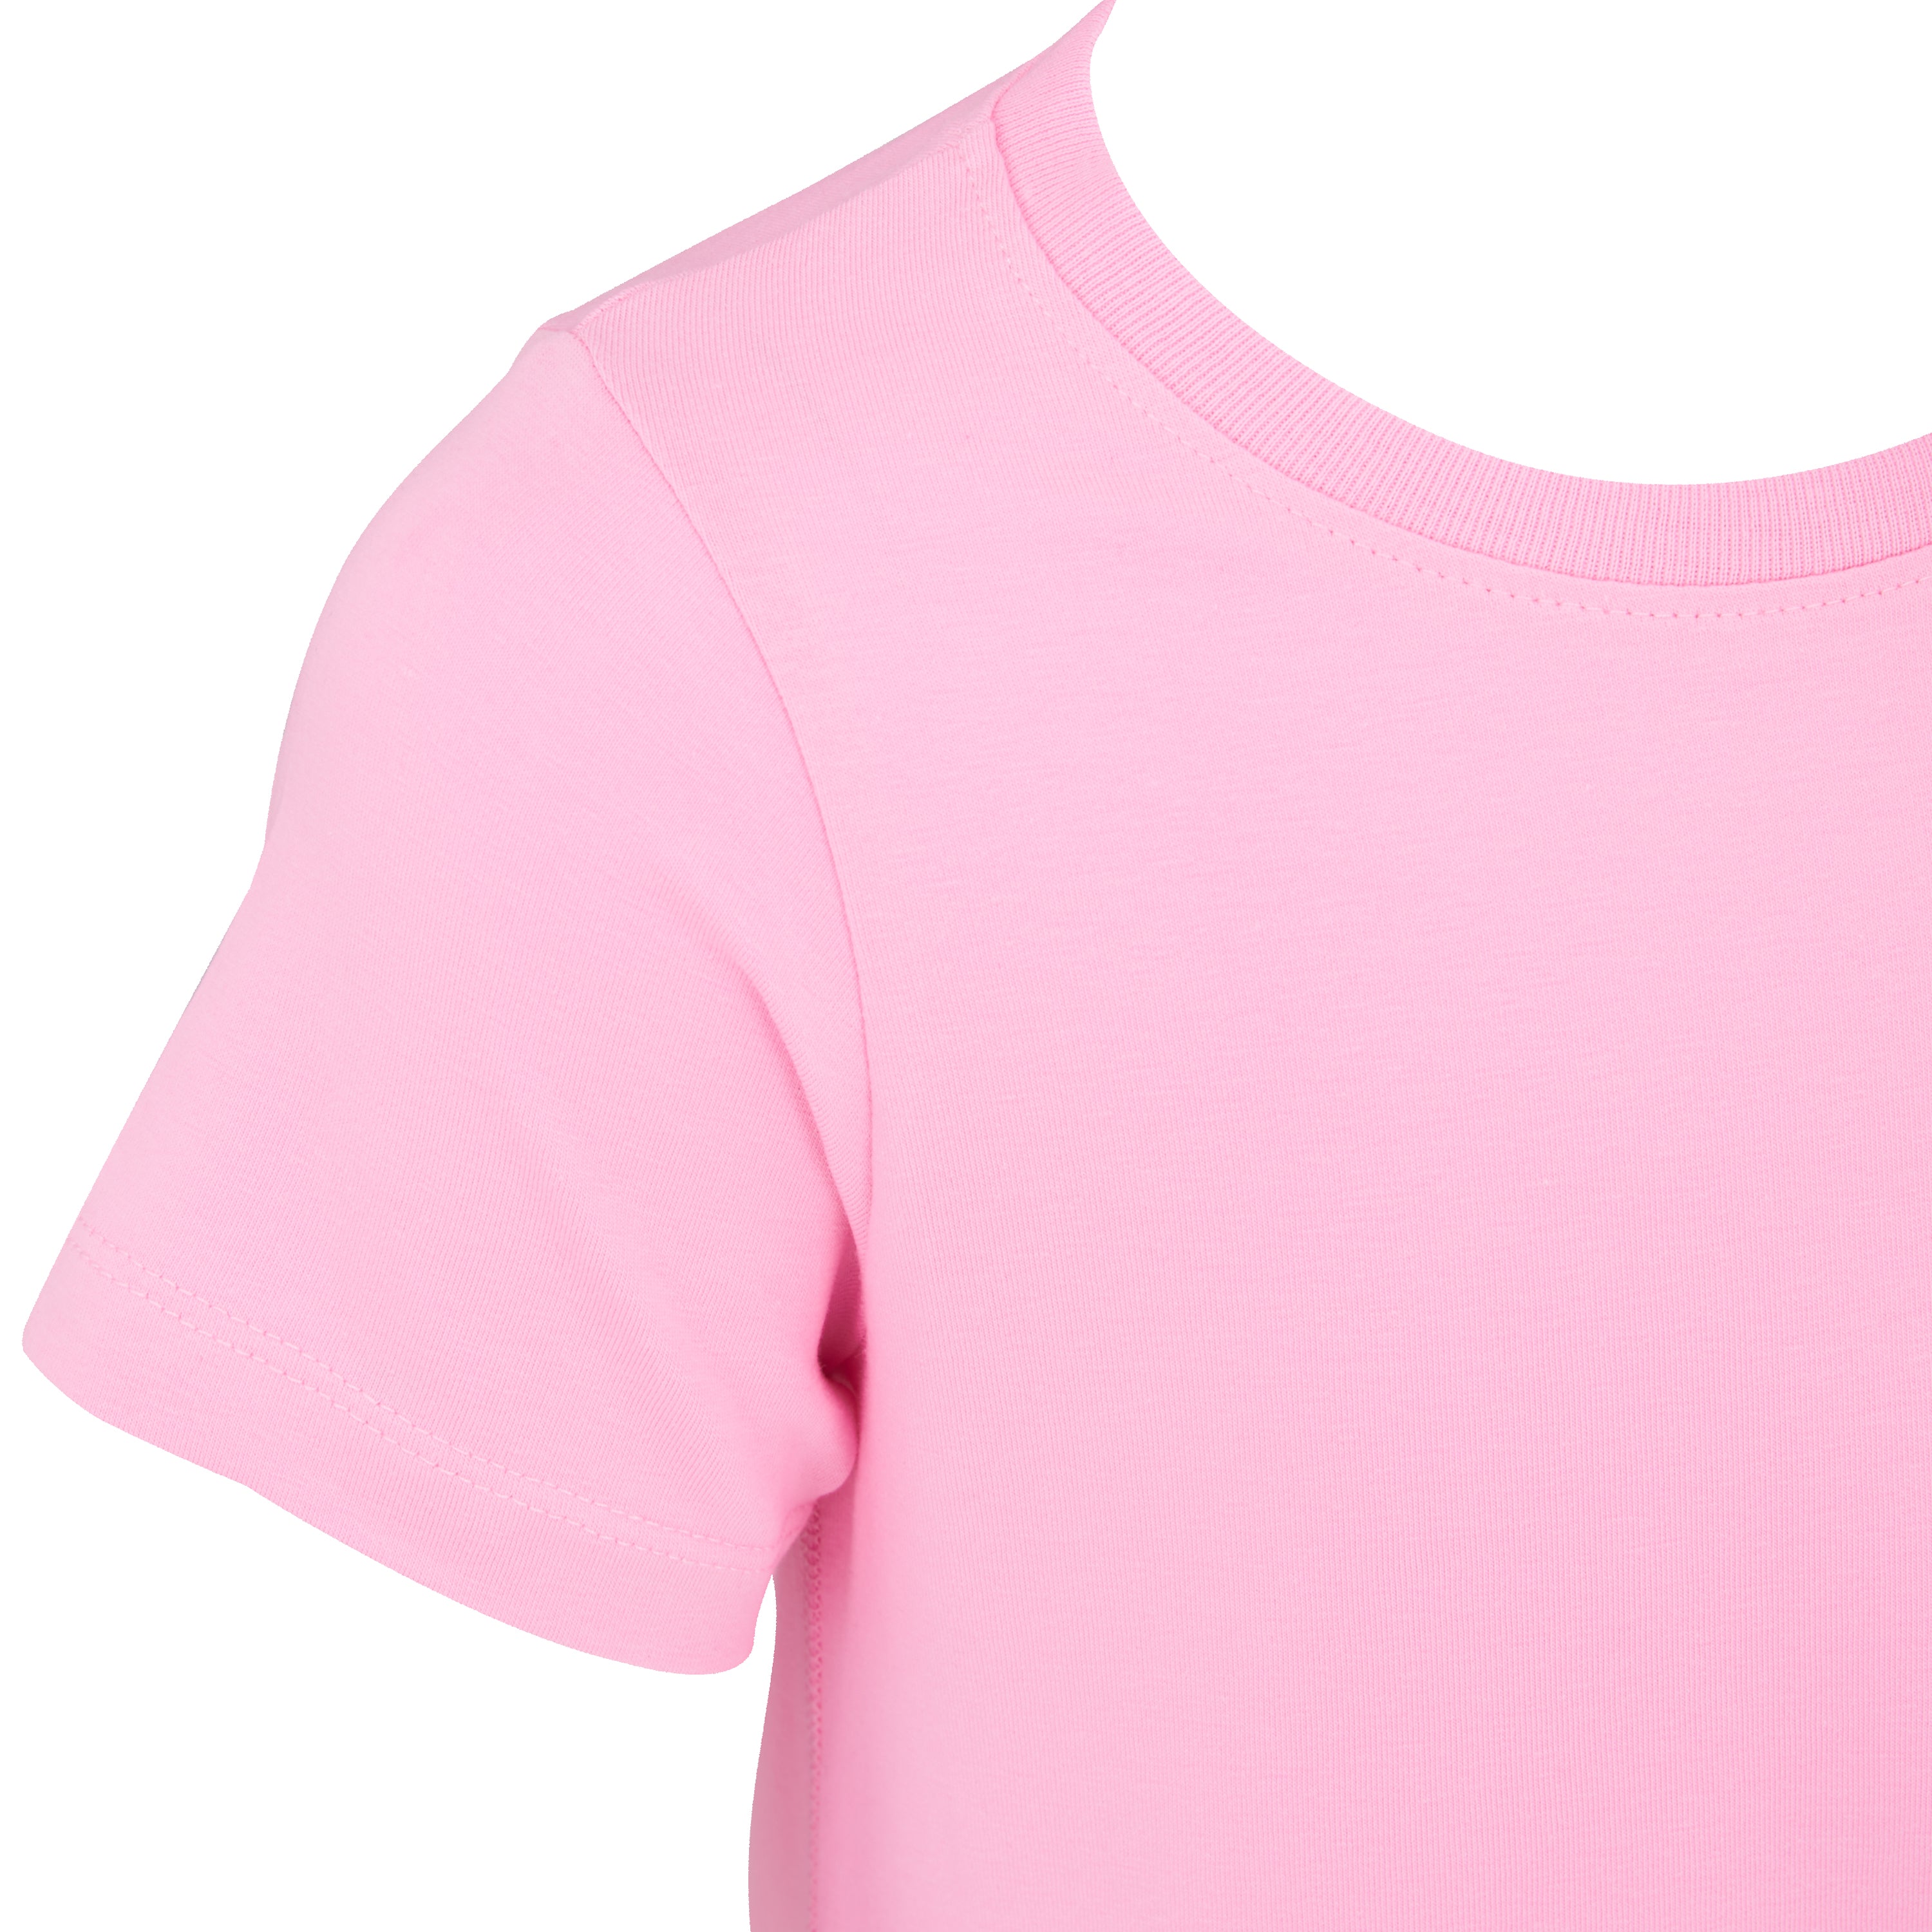 KayCey_Adaptive_clothing_for_older_children_with_special_needs_Short_Sleeve_Pink_Shoulder